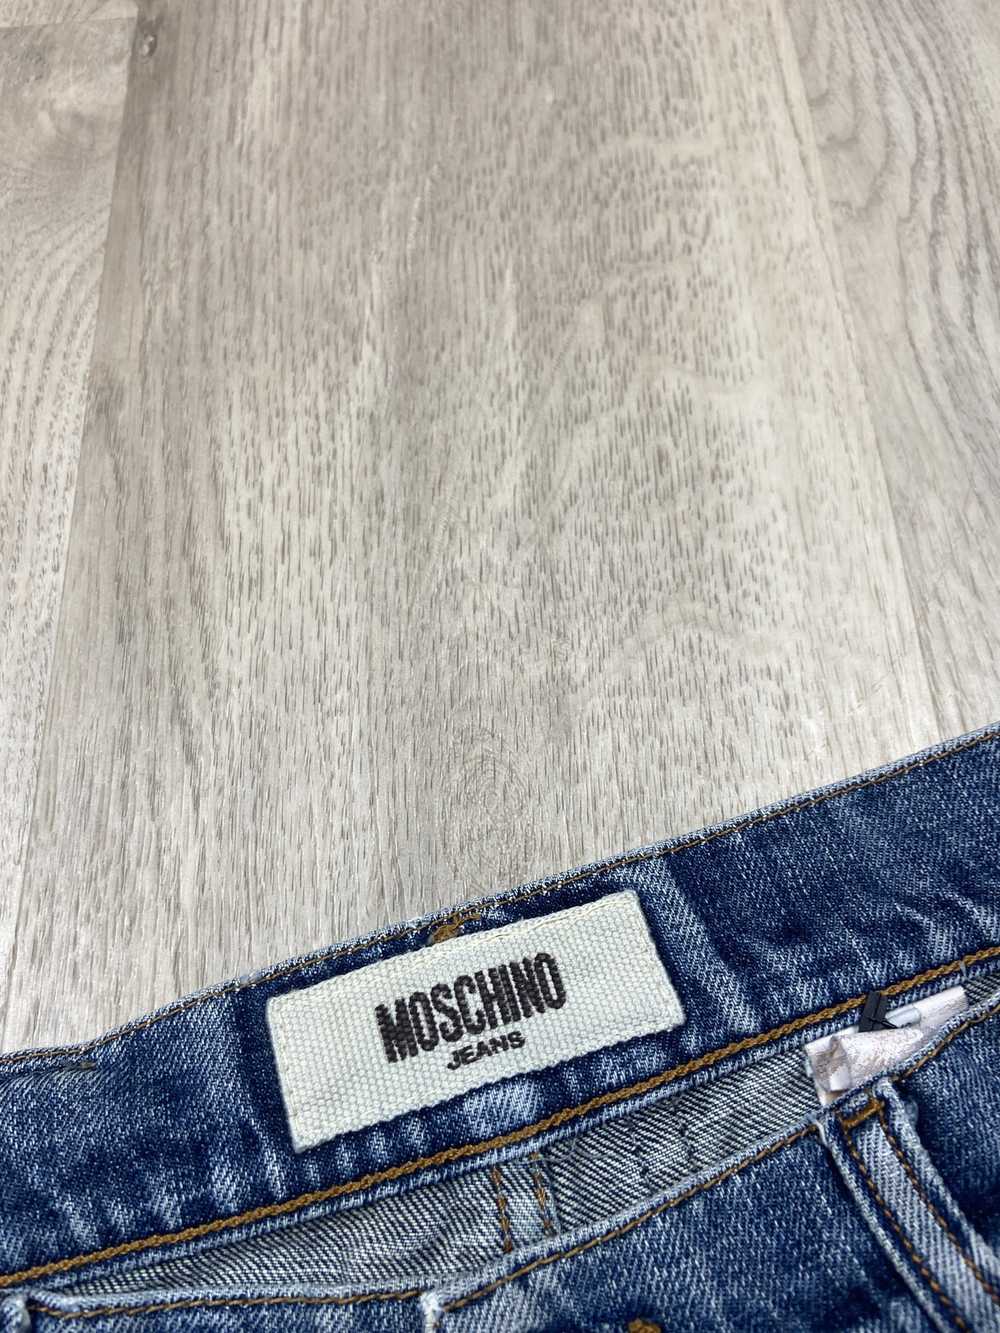 Moschino × Vintage Moschino Vintage Mens Patchwor… - image 7